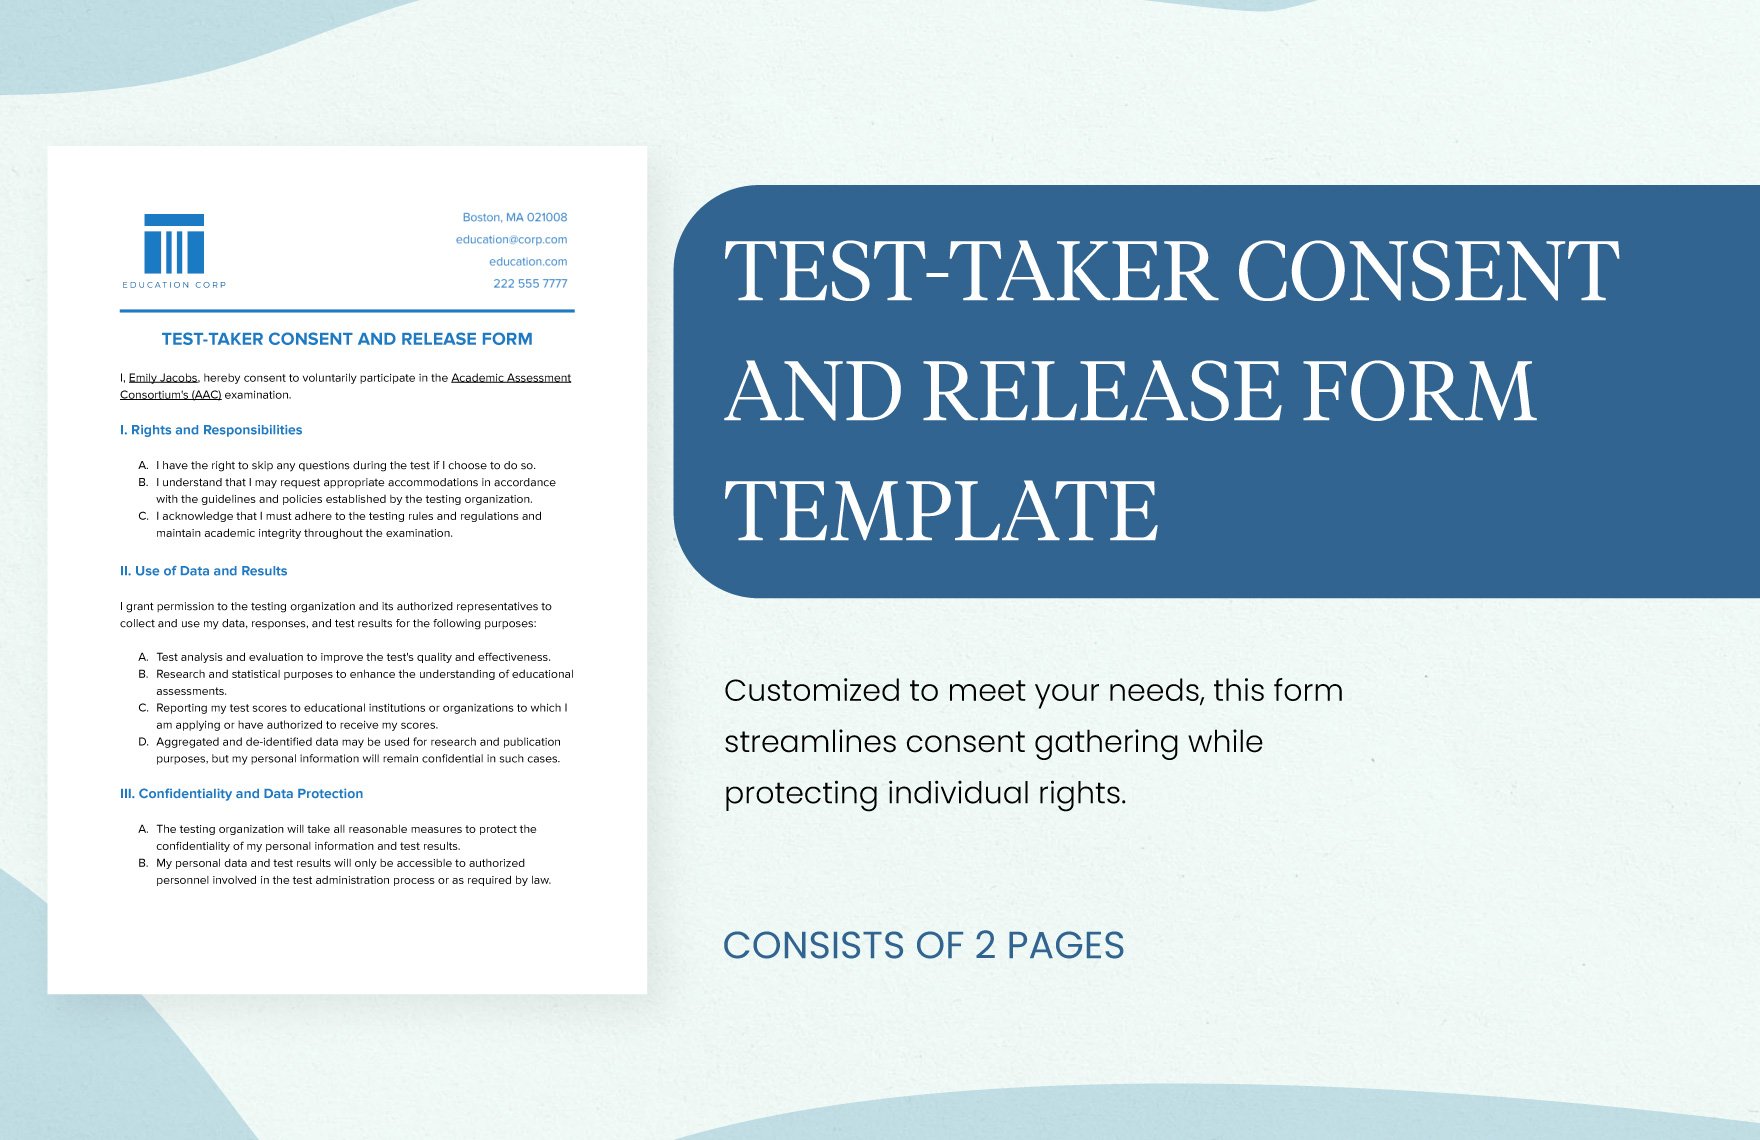 Test-Taker Consent and Release Form Template in Word, Google Docs, PDF